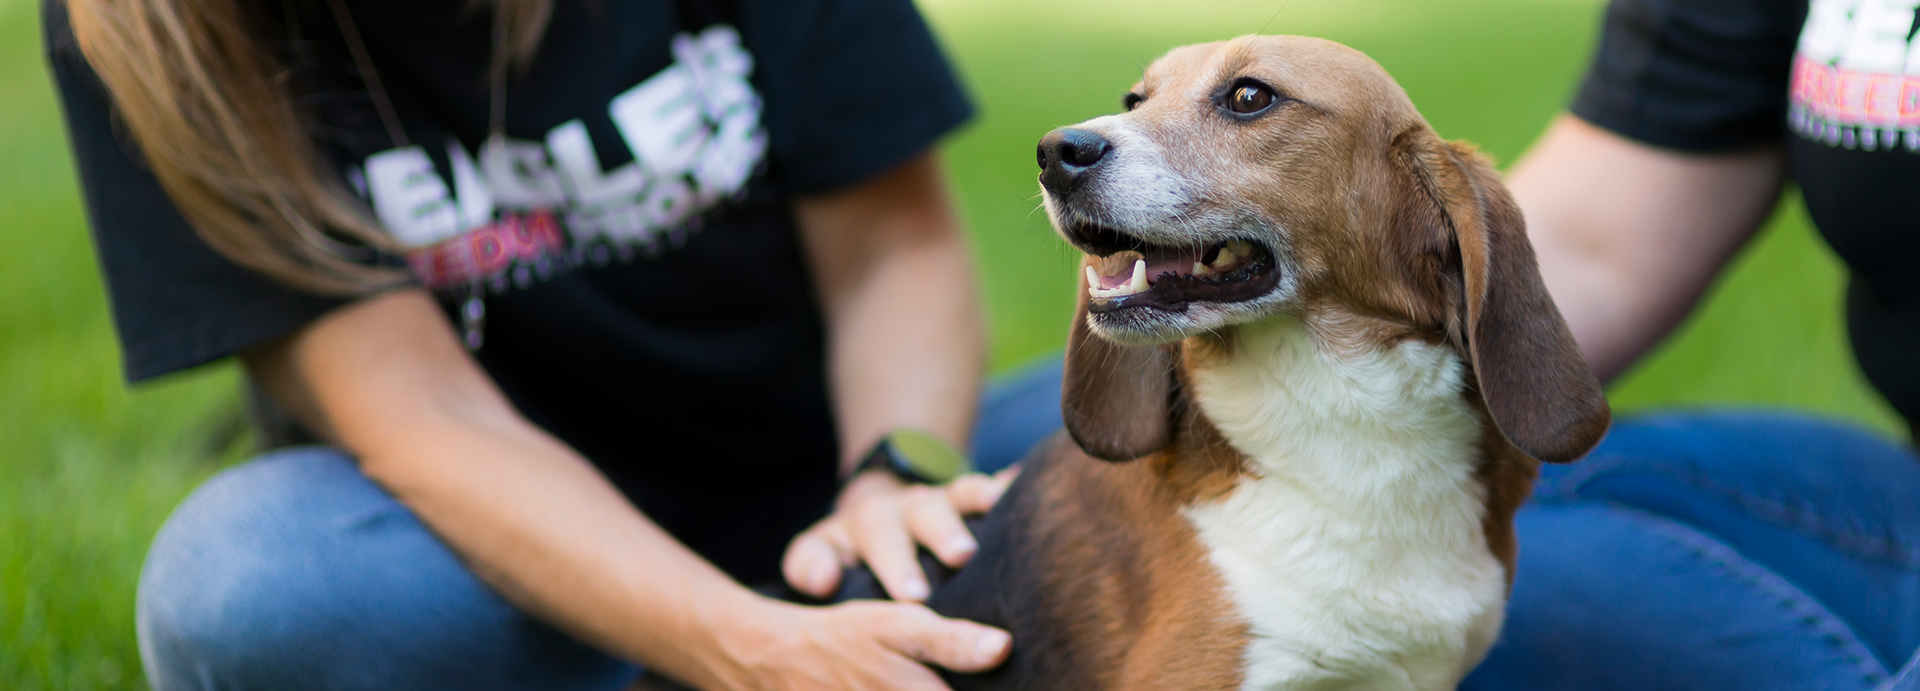 Beagle Freedom Project: Saving dogs from becoming lab rats